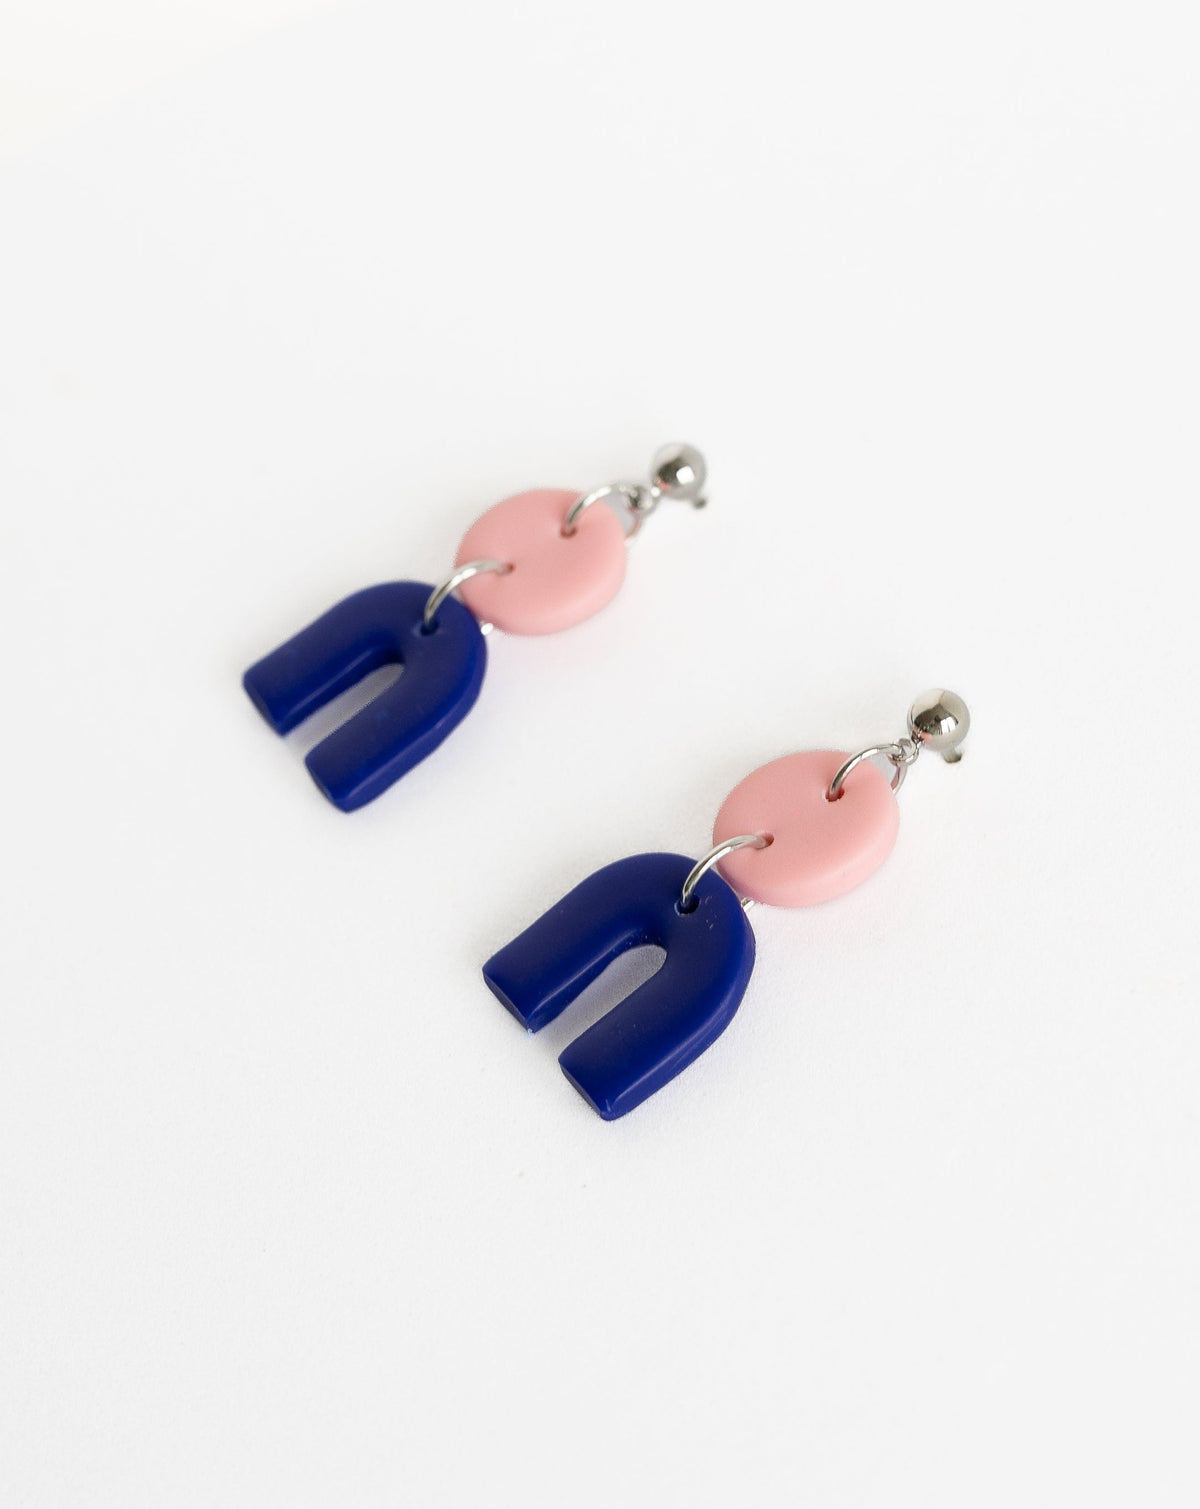 Tiny Arch earrings in two part of Sof pink and Hue Blue polymer clay parts with silver Ball studs, angled view.